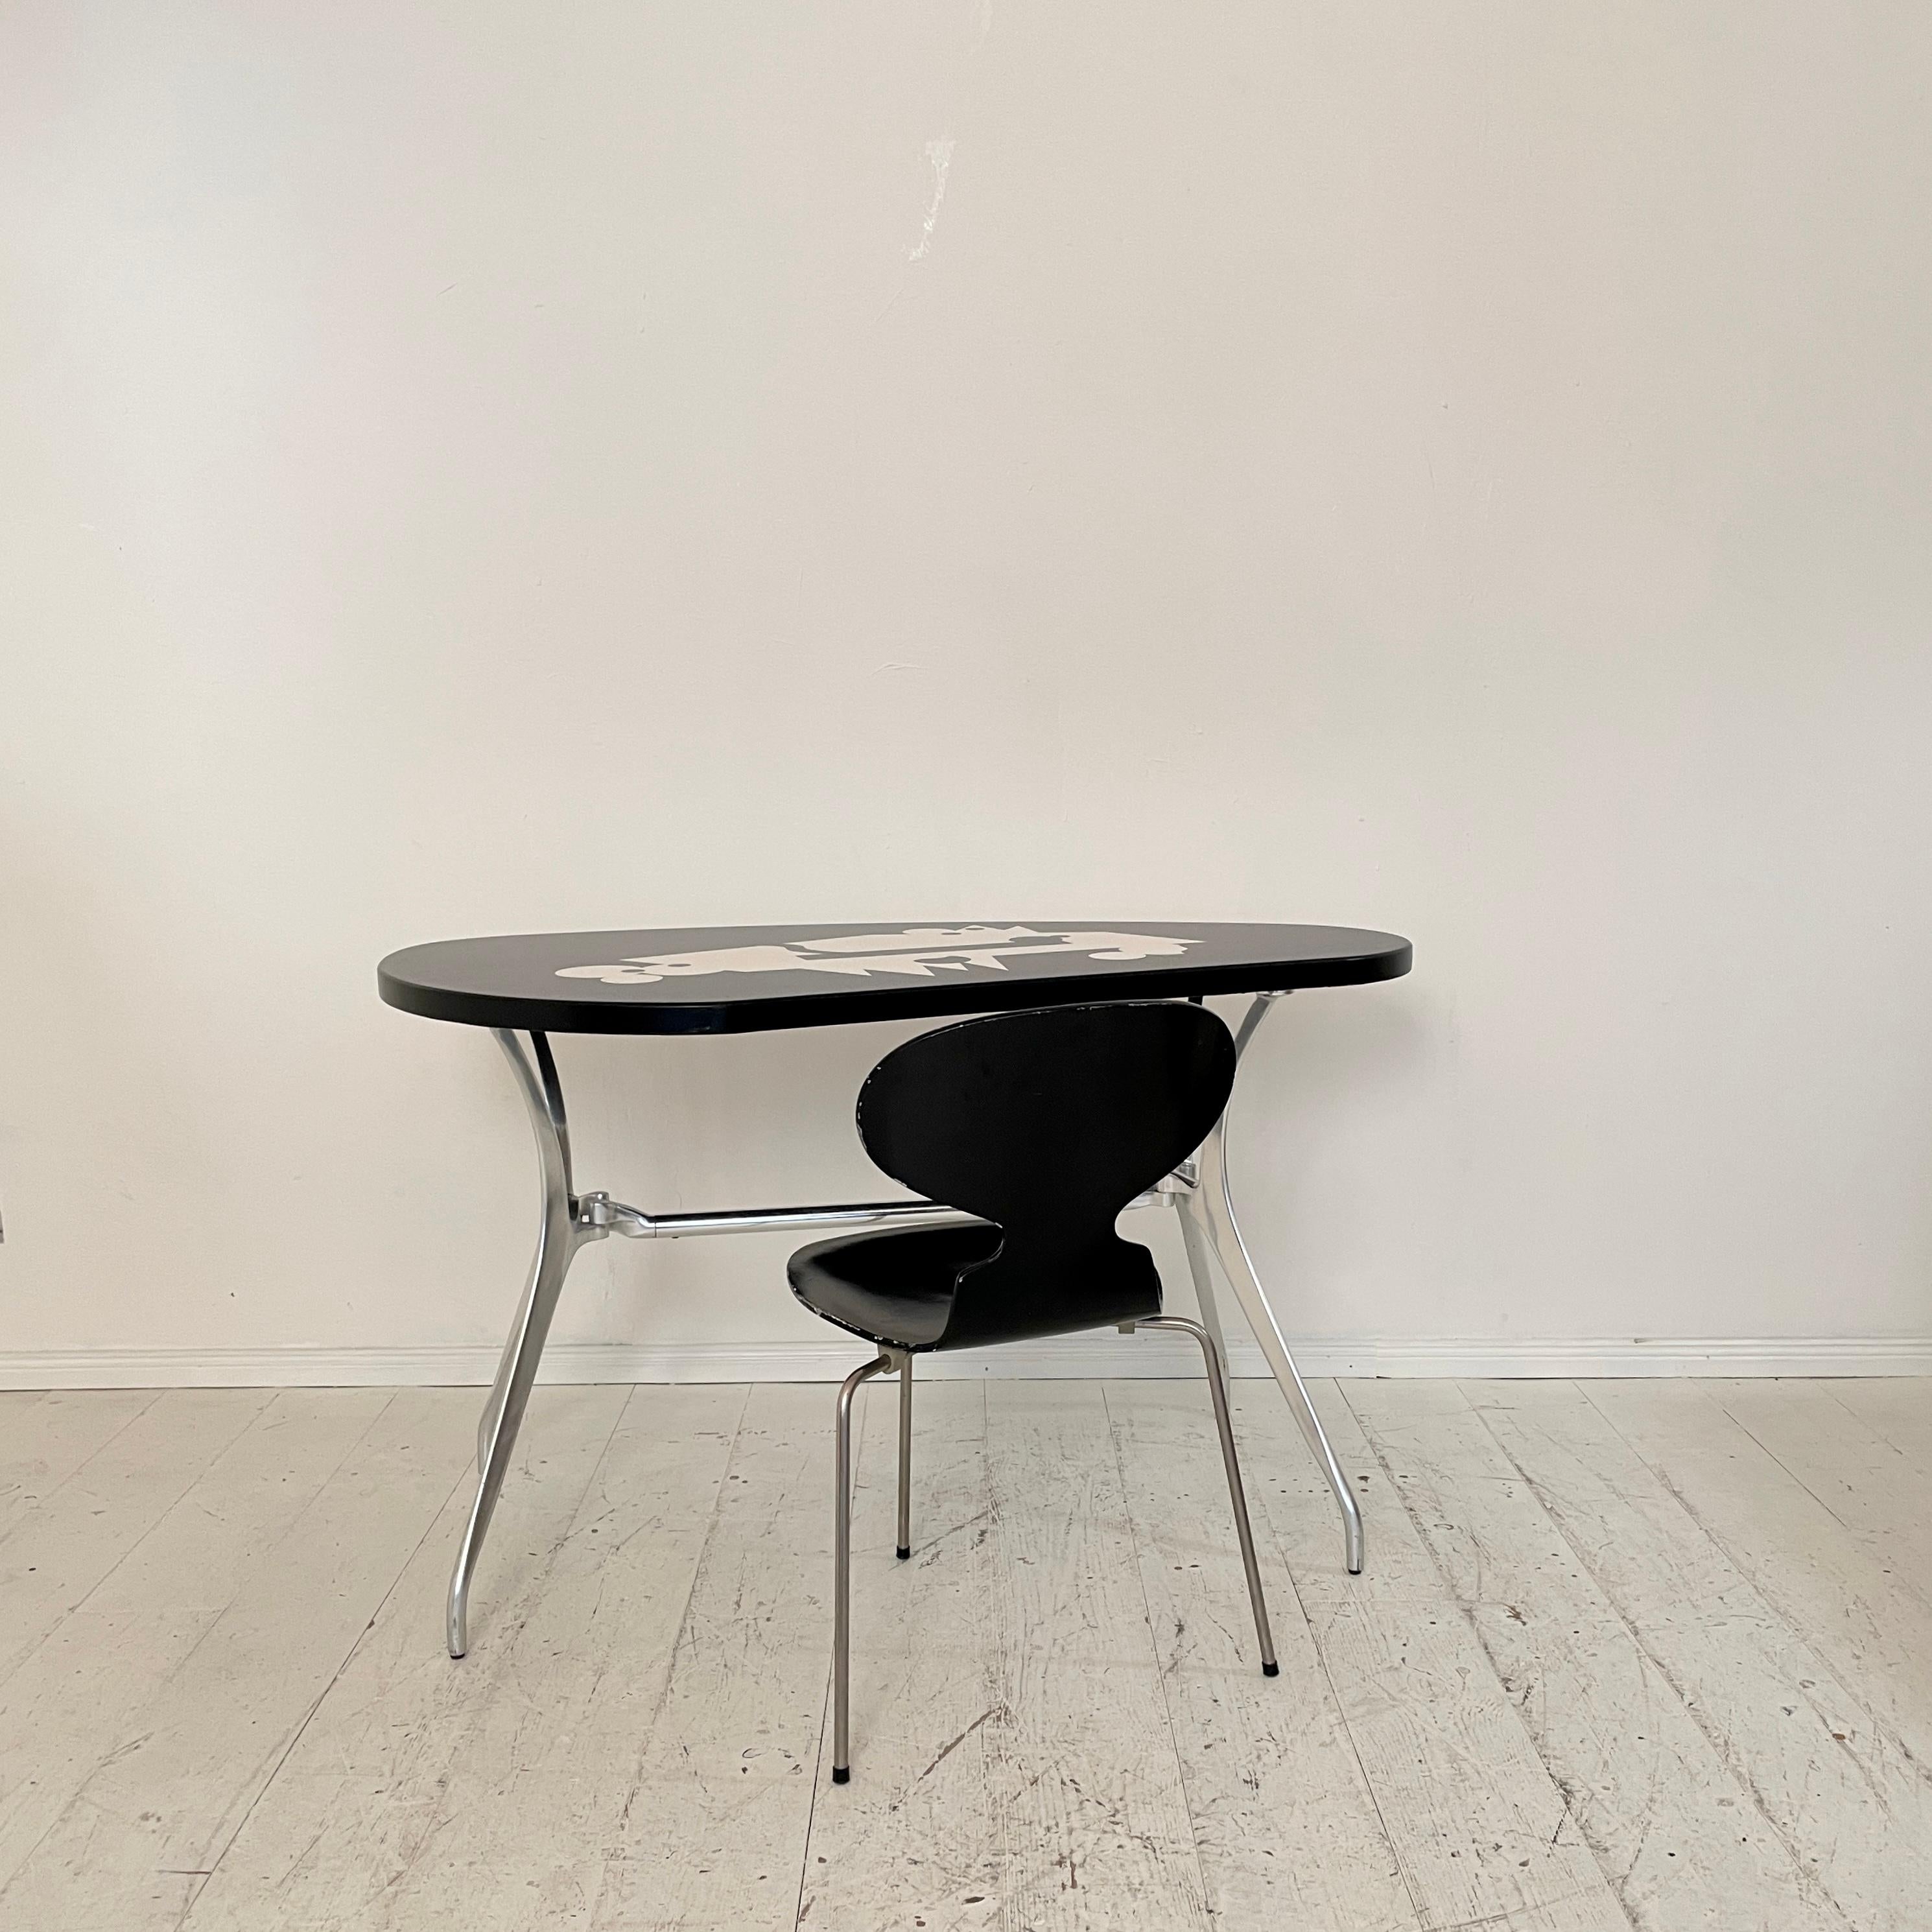 This beautiful early Mid-Century Ant Chair by Arne Jacobsen for Fritz Hansen was made around 1957.
The chair has got a steel base and a black lacquered plywood seat.
It is a great original condition.
A unique piece which is a great eye-catcher for